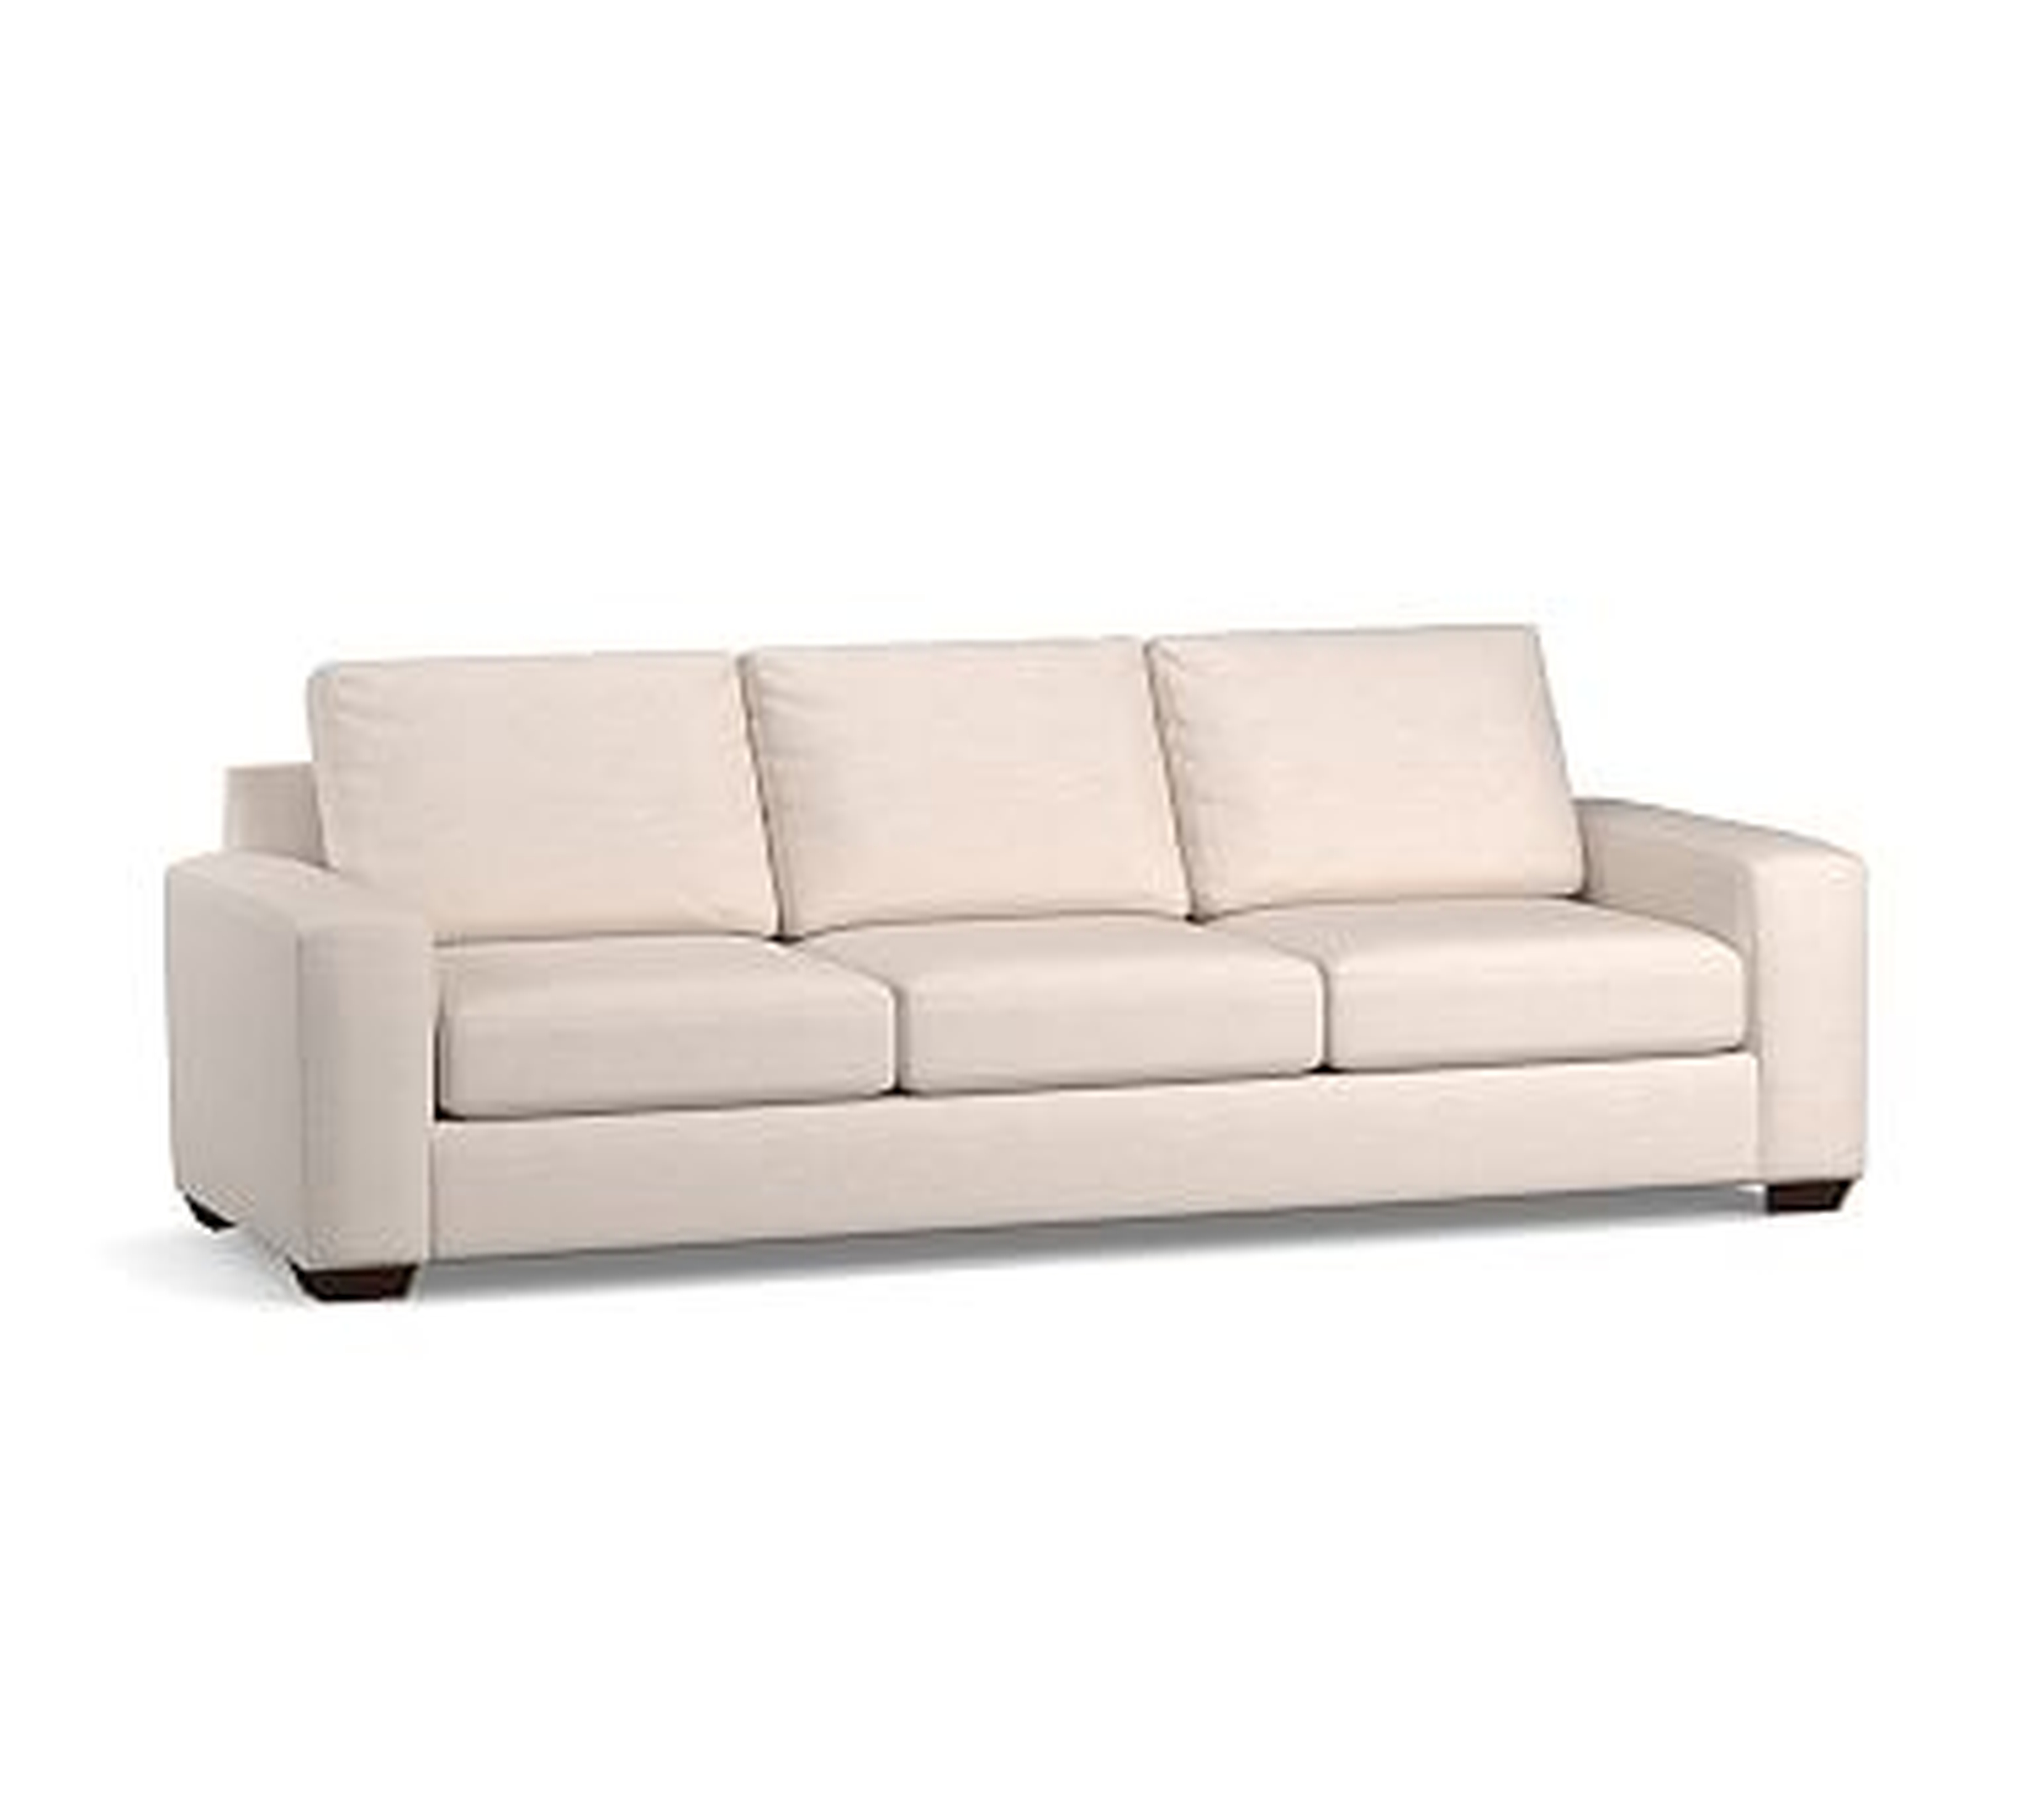 Big Sur Square Arm Upholstered Grand Sofa 105", Down Blend Wrapped Cushions, Performance Chateau Basketweave Oatmeal - Pottery Barn